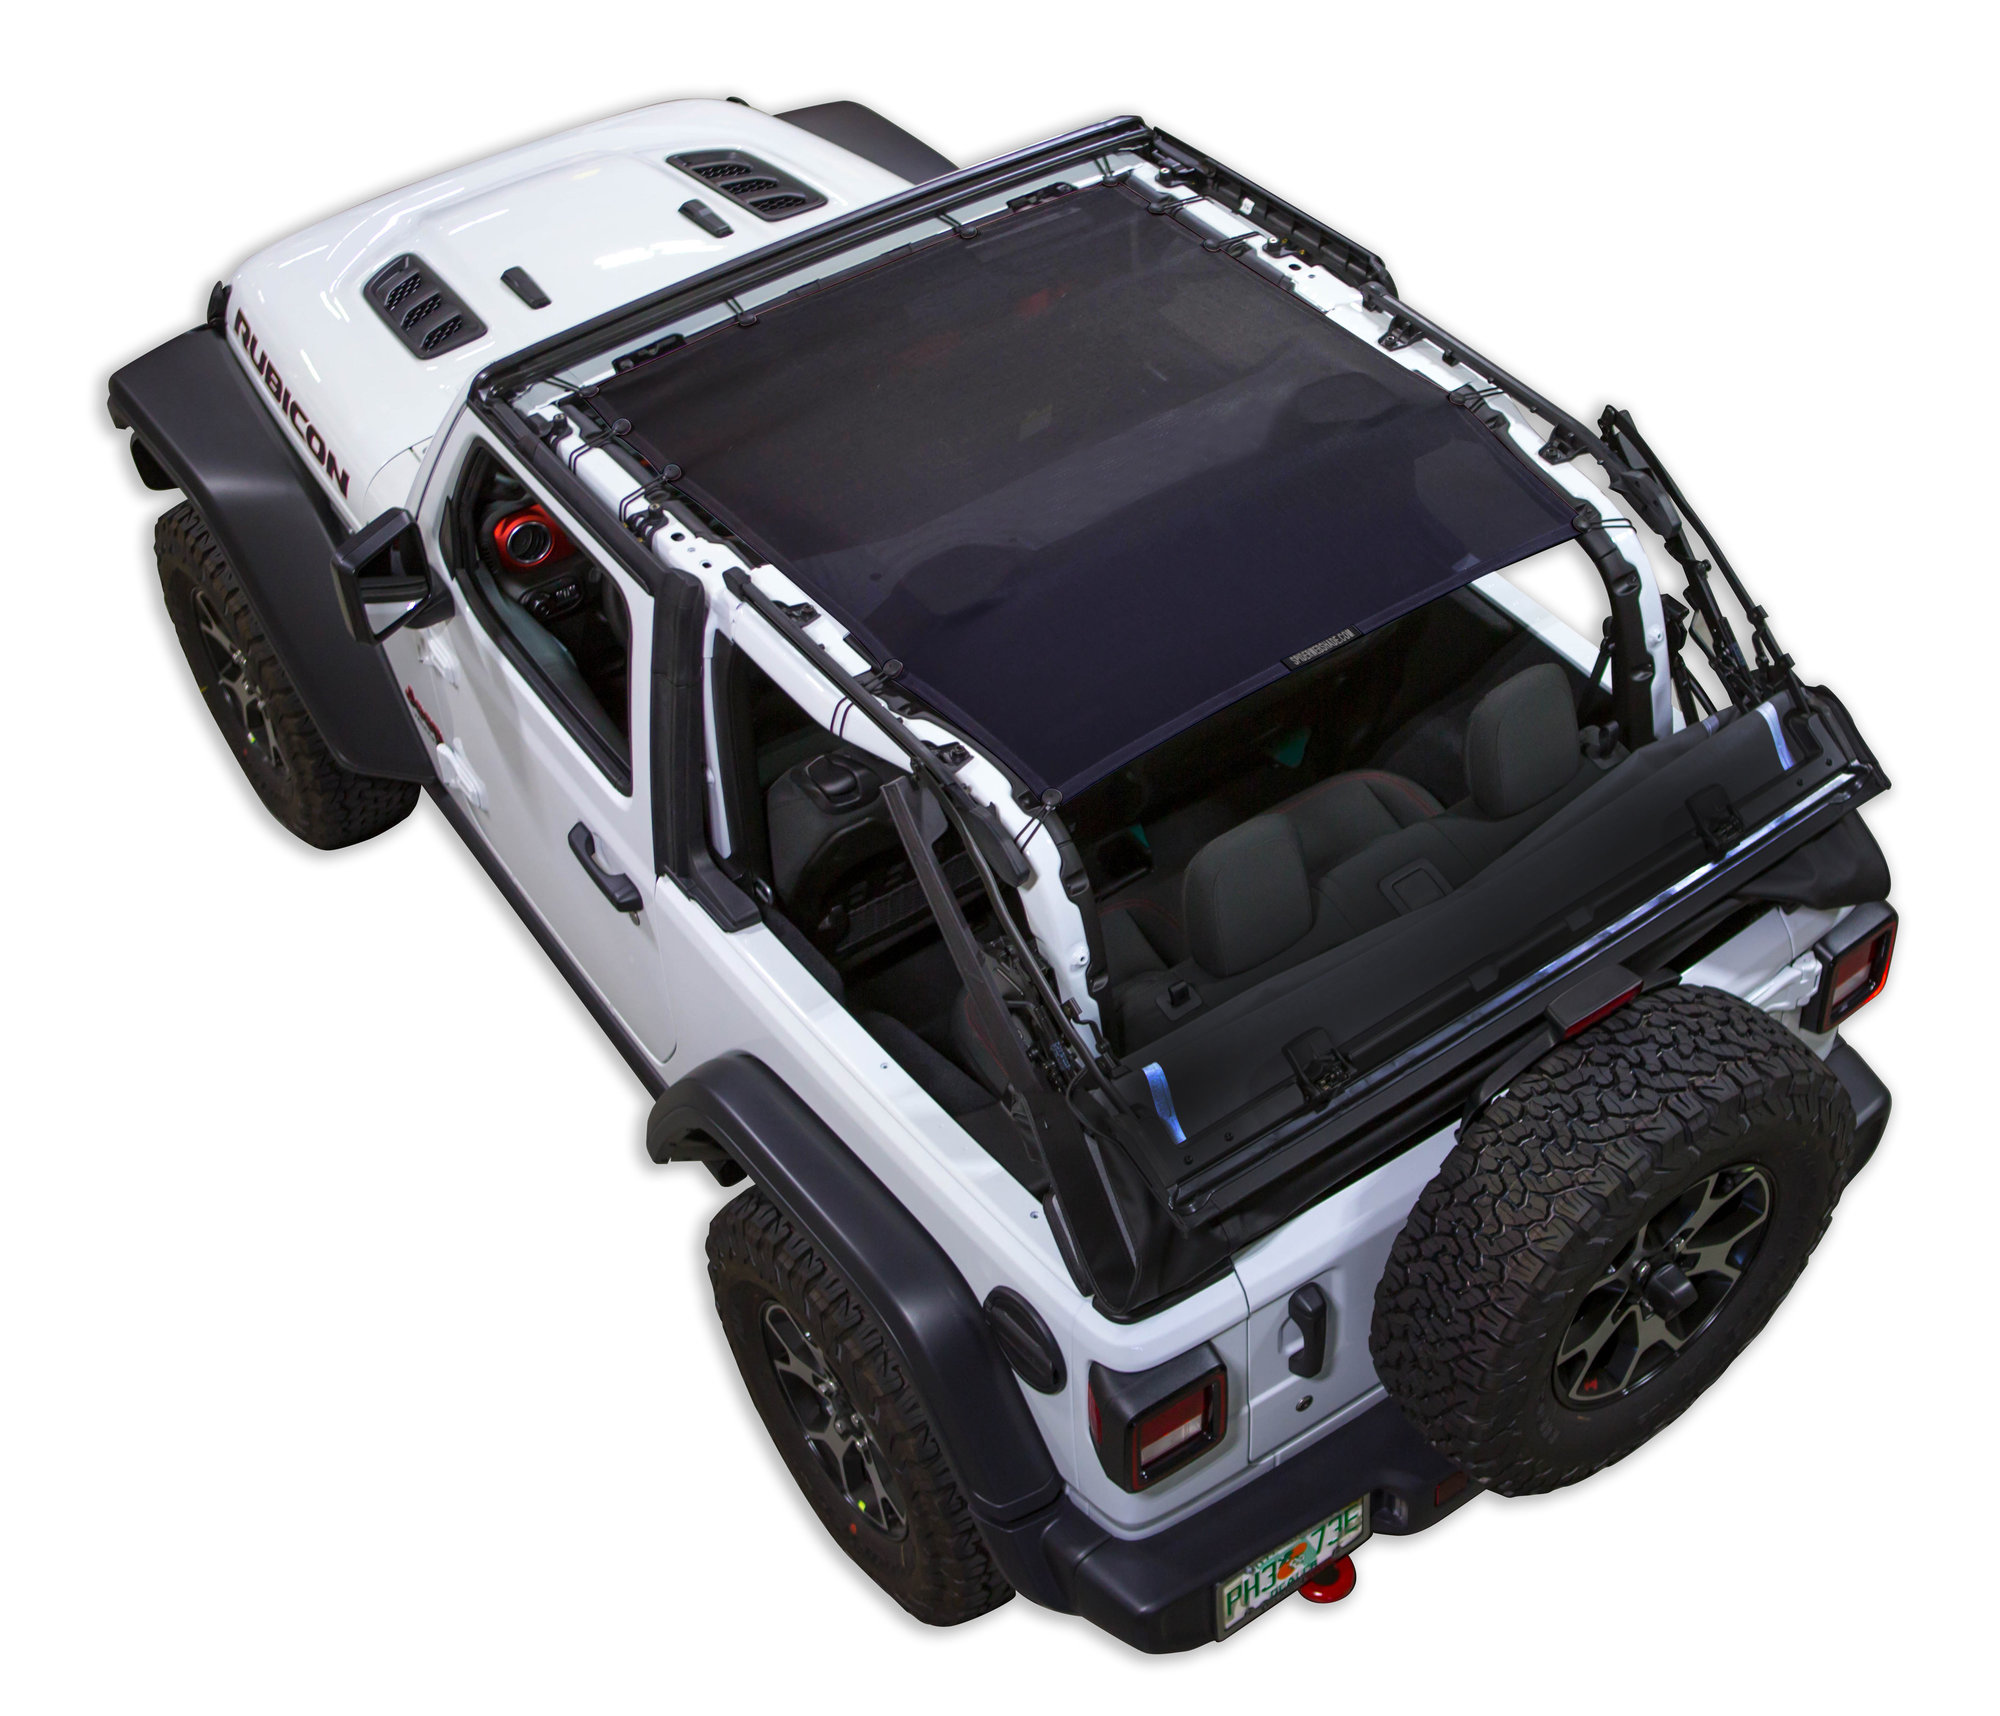 in Grey SPIDERWEBSHADE Jeep Wrangler Mesh Shade Top Sunshade UV Protection Accessory USA Made for Your TJ 1997-2006 